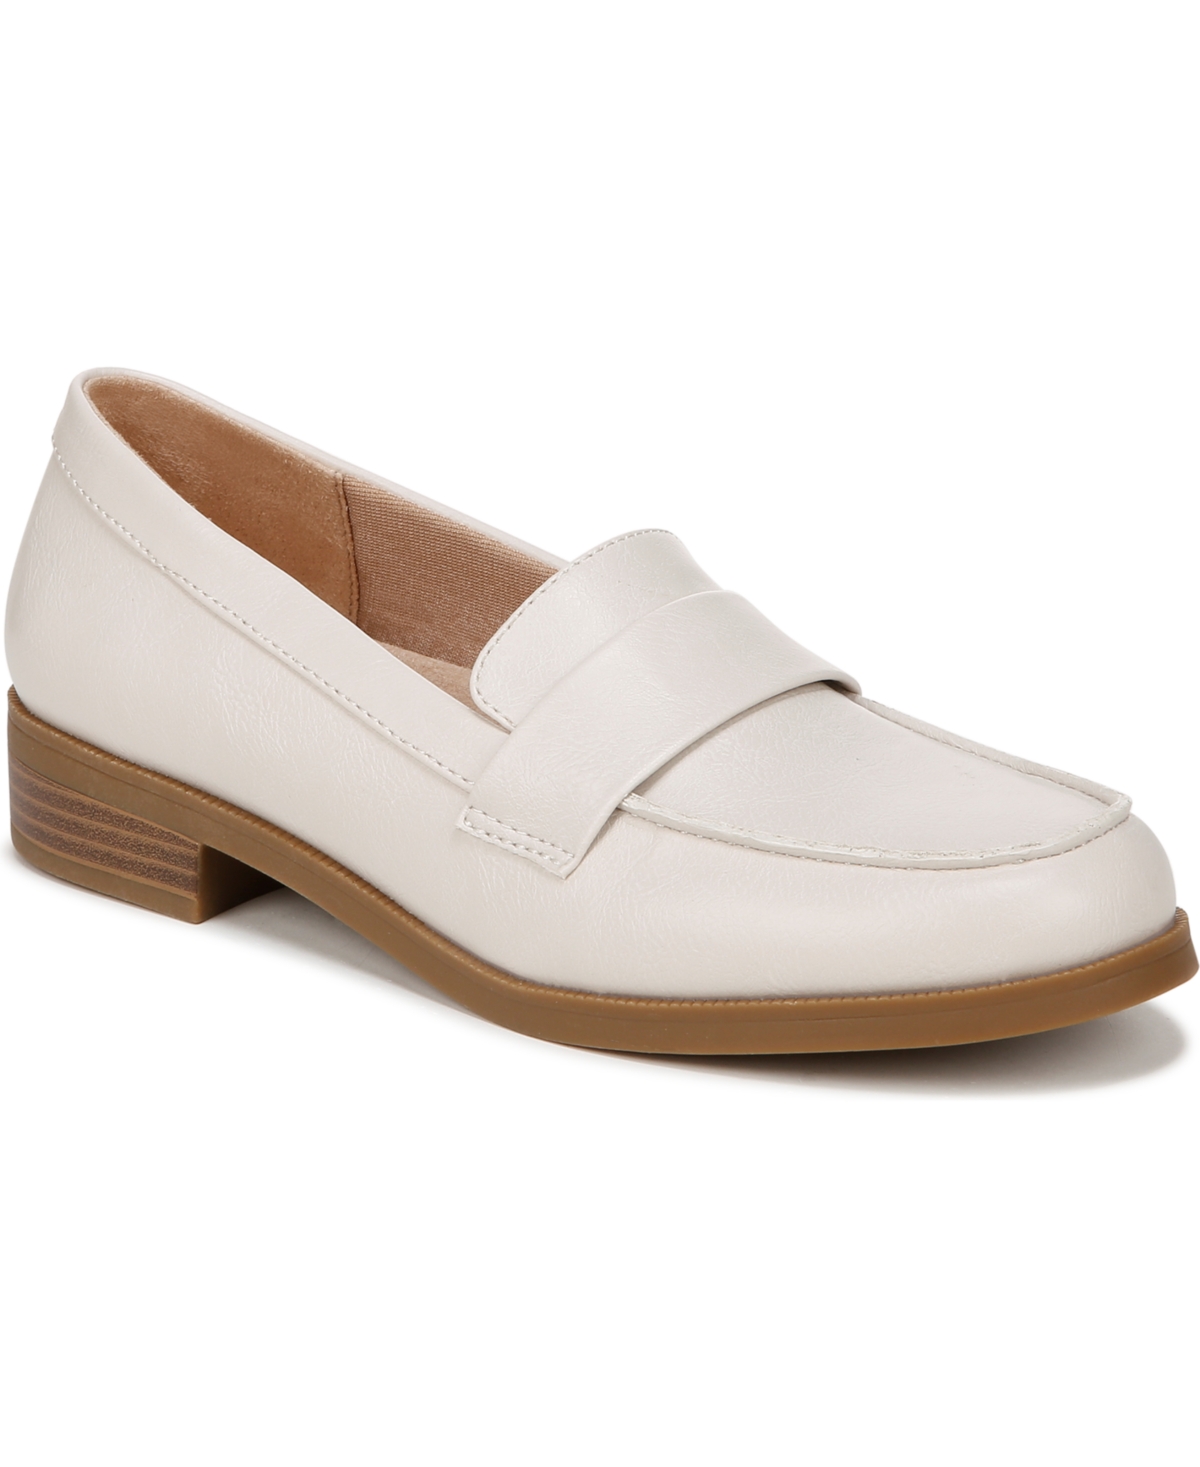 Shop Lifestride Women's Sonoma 2 Slip On Loafers In Bone White Faux Leather